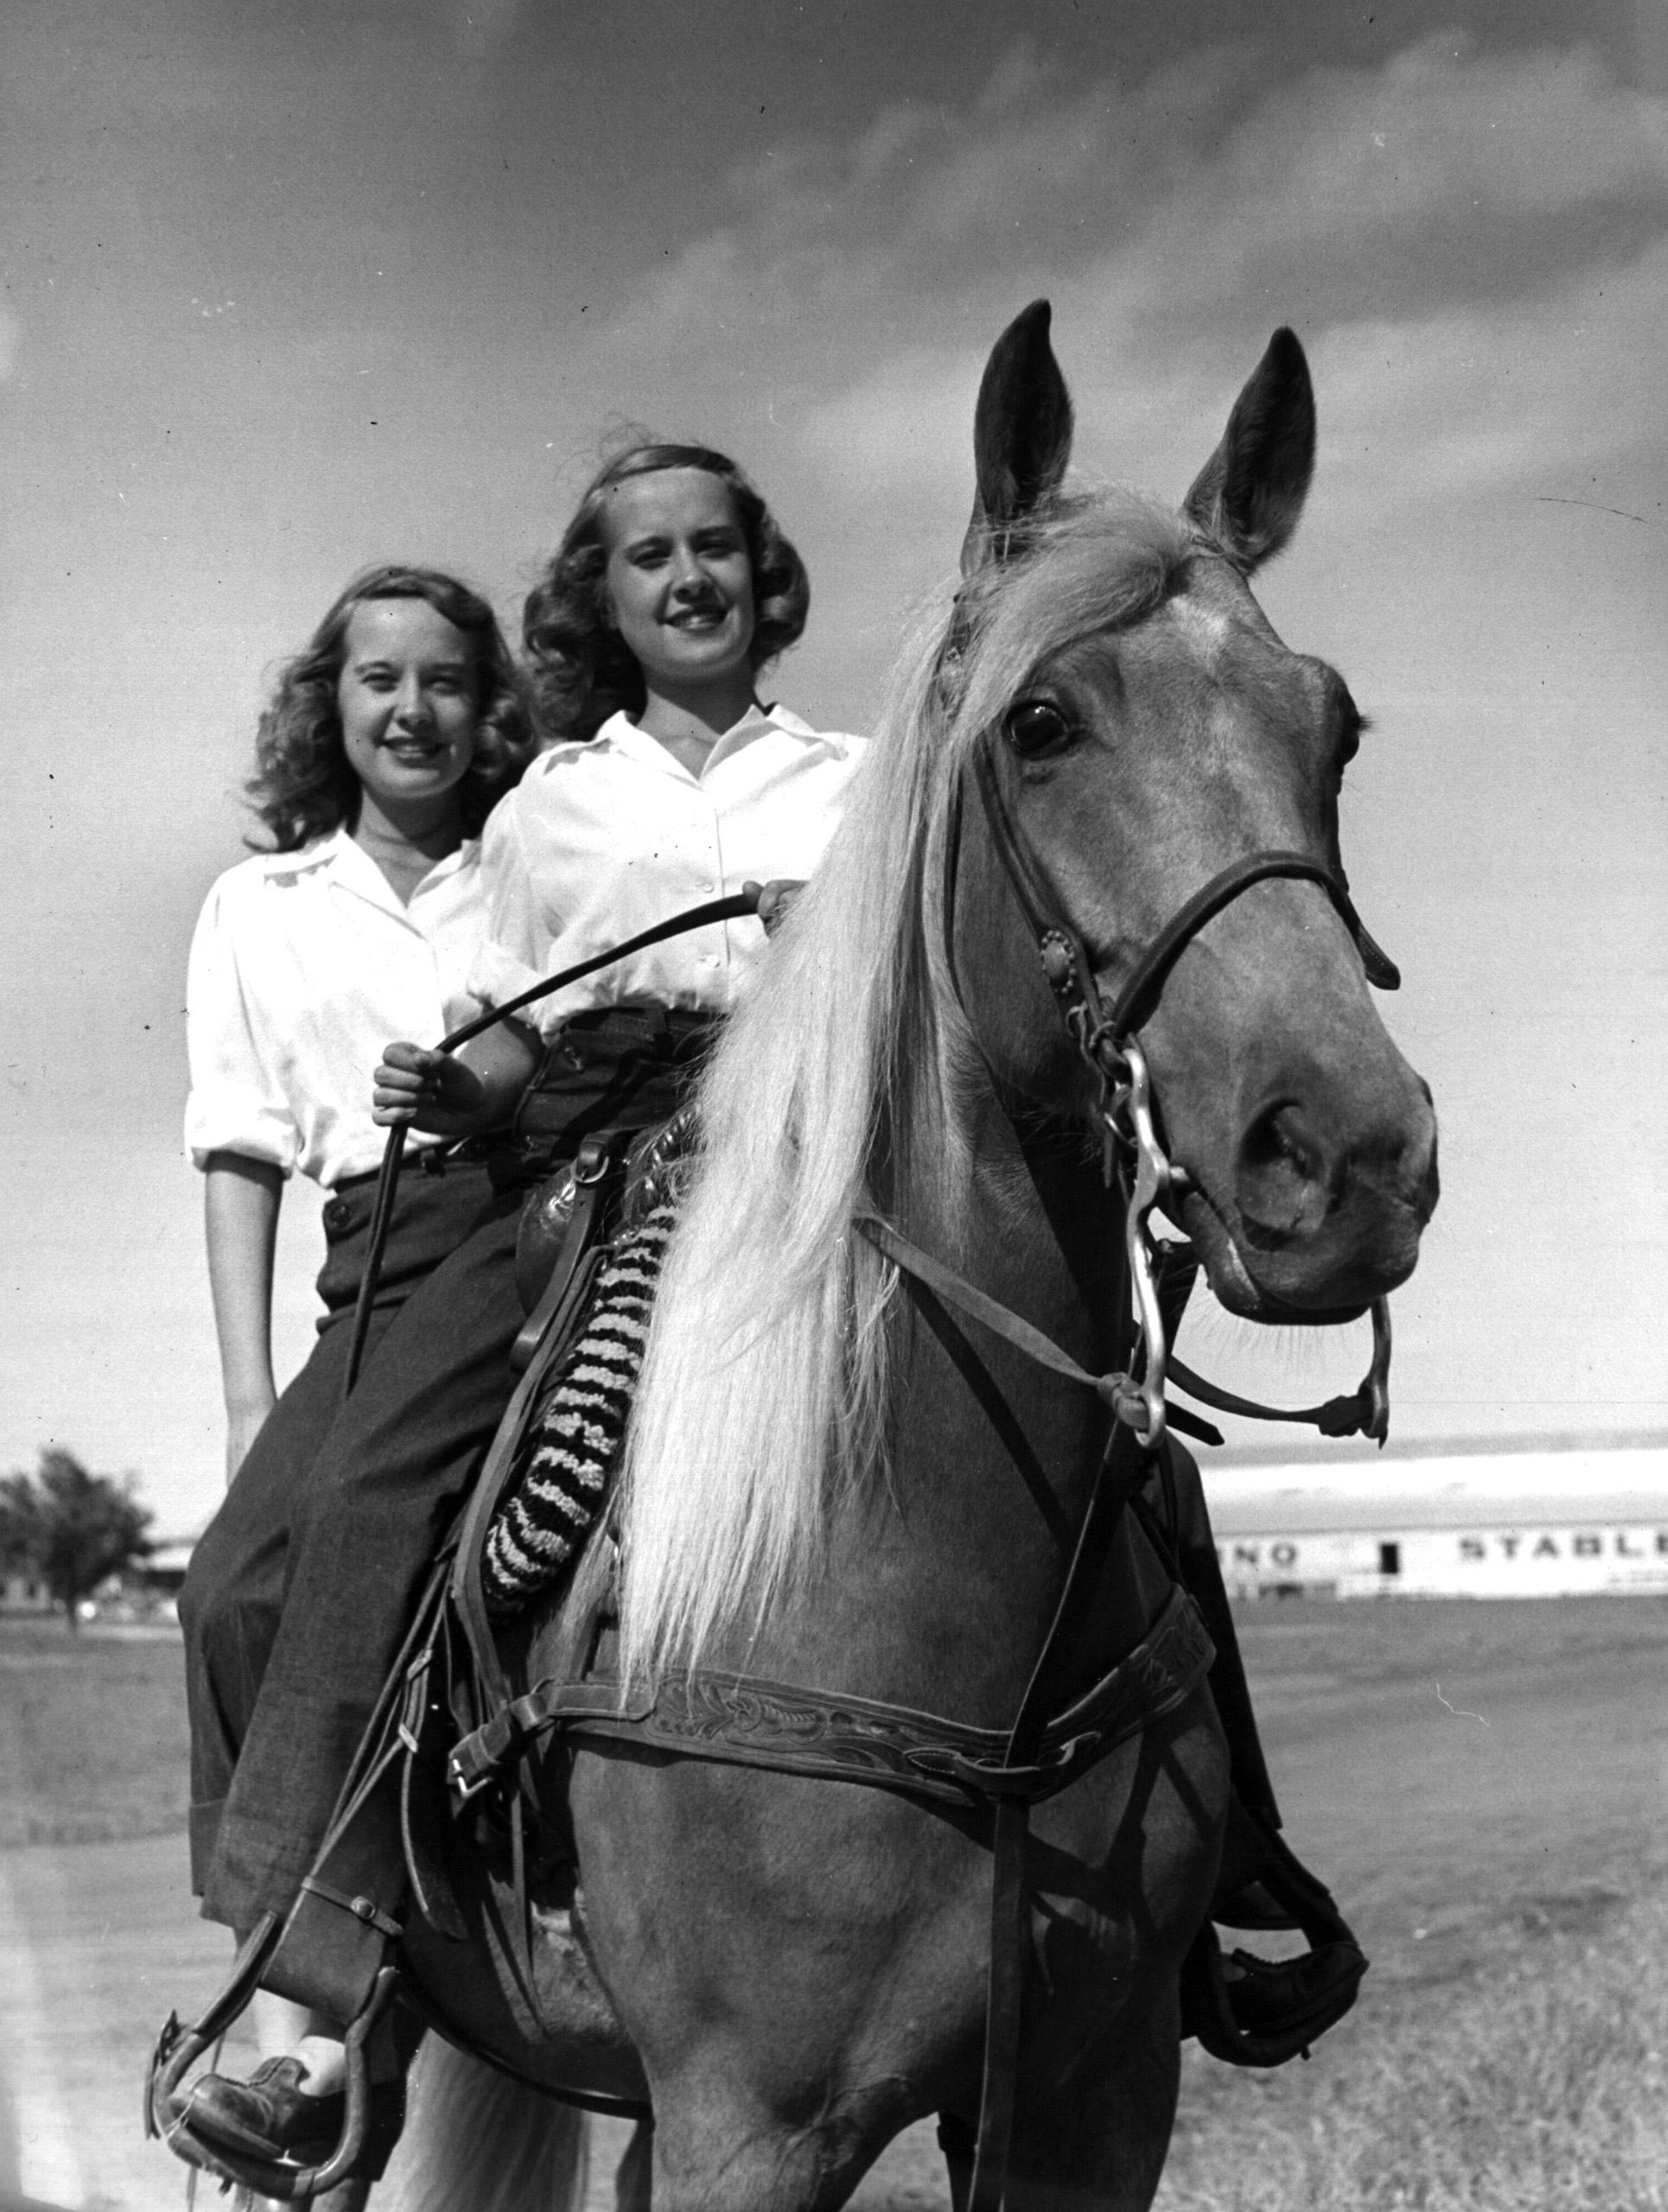 Identical twins, Barbara and Betty Bounds riding a horse.